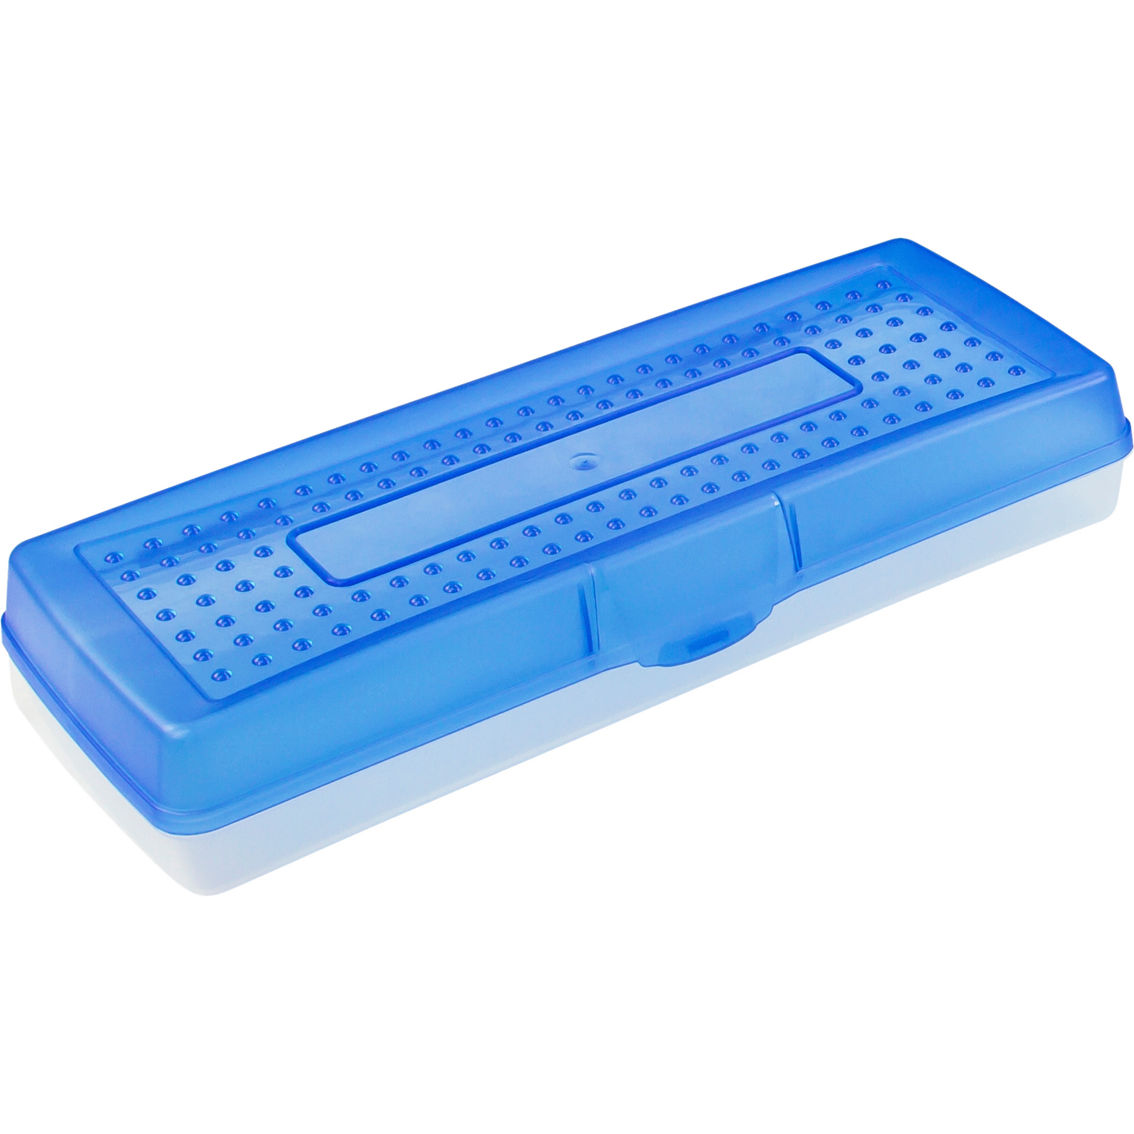 Storex Stretched Pencil Box 12 ct. Case - Image 3 of 6